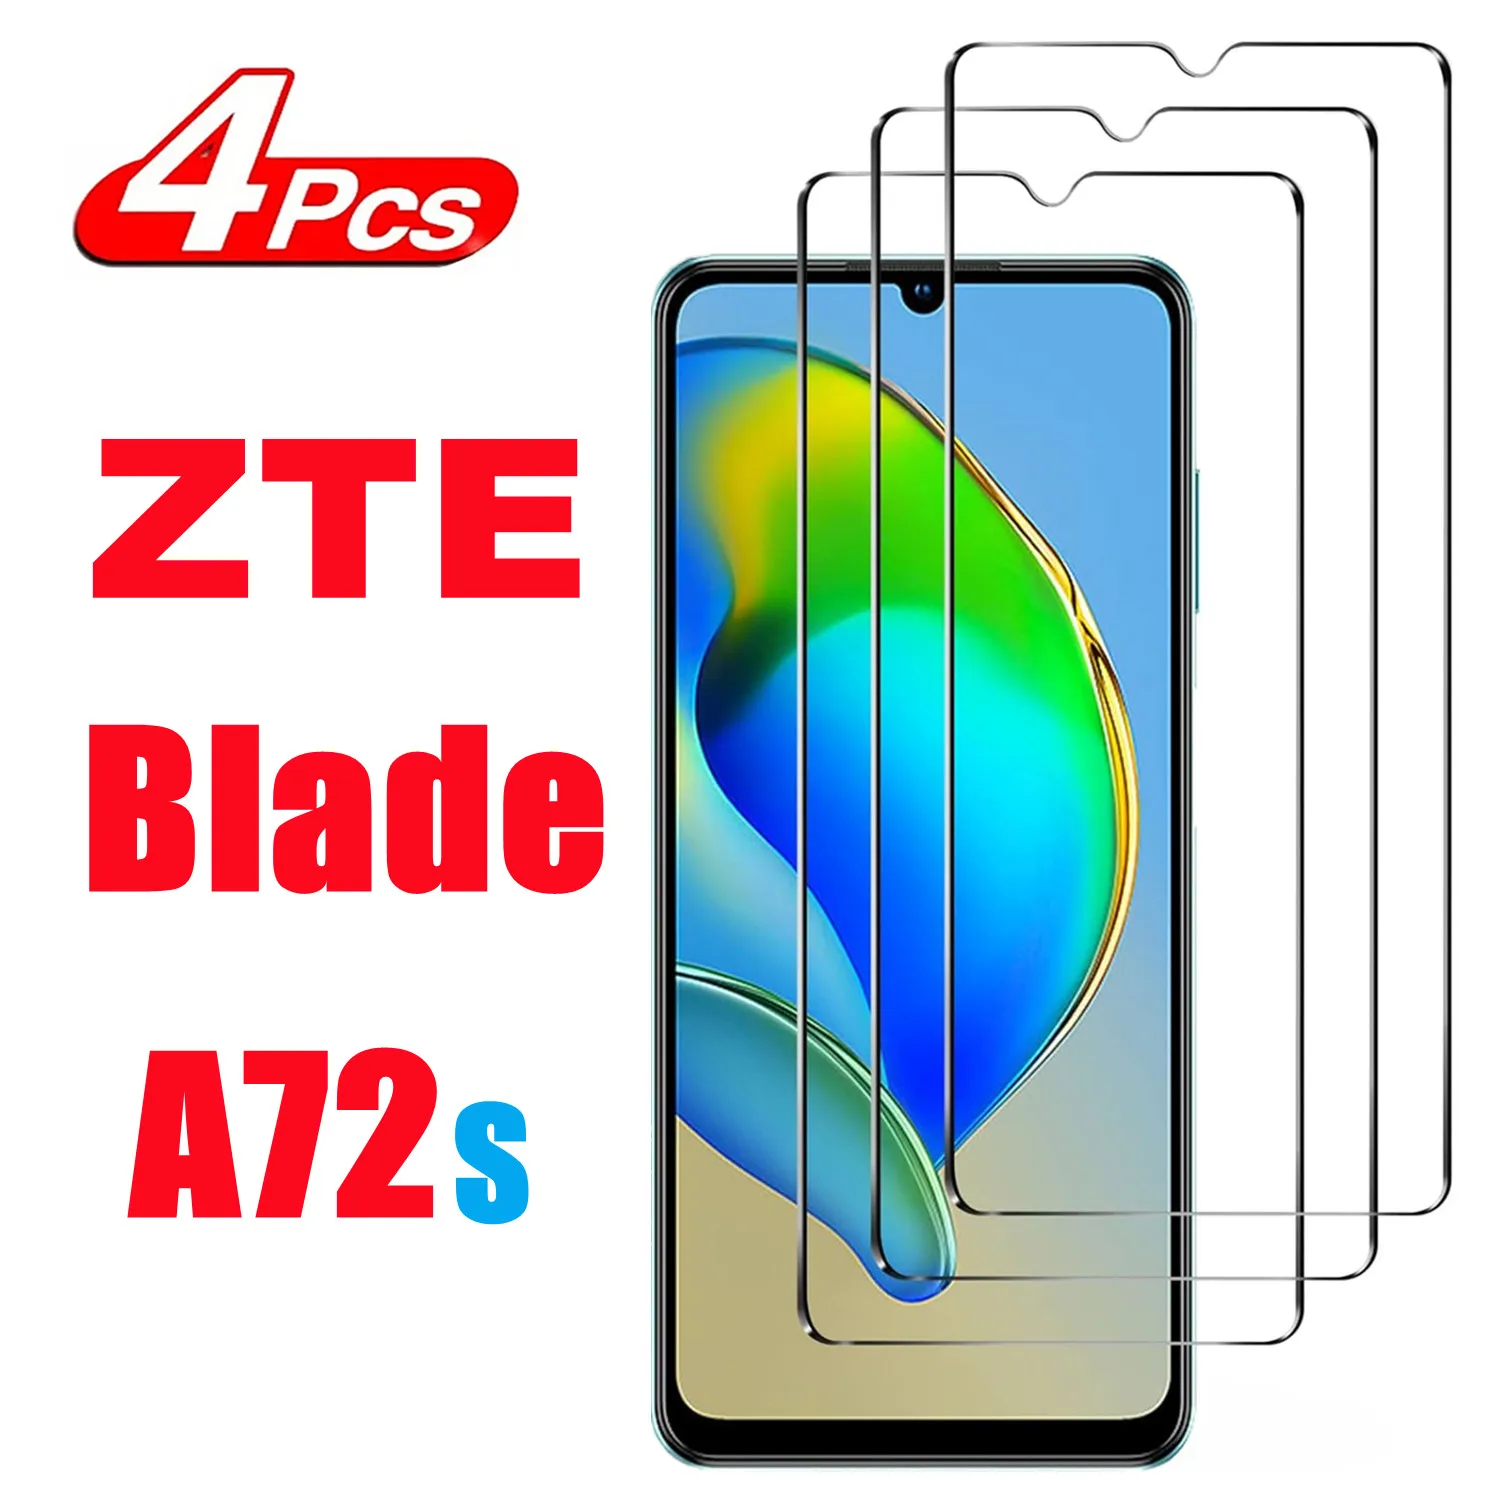 2/4 Pcs For ZTE Blade A72s 9H Tempered Glass For ZTE Blade A72s Screen Protector Glass Film for zte blade a6 lite a0622 tempered glass film 9h explosion proof front lcd screen protector for zte blade a6 premium 5 2 inch